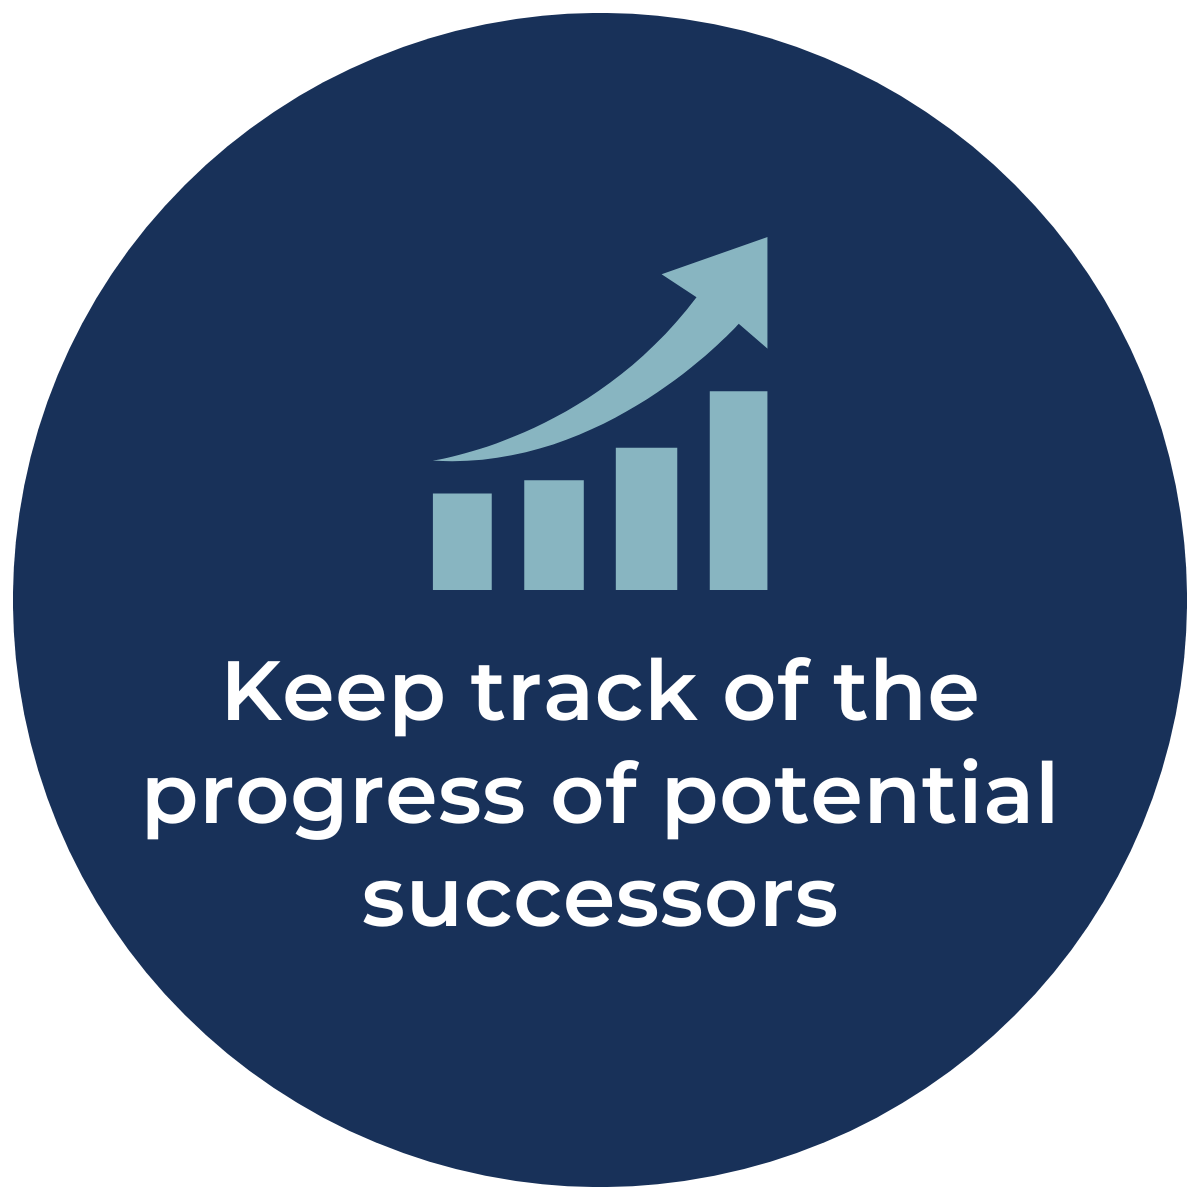 Keep track of the progress of potential successors